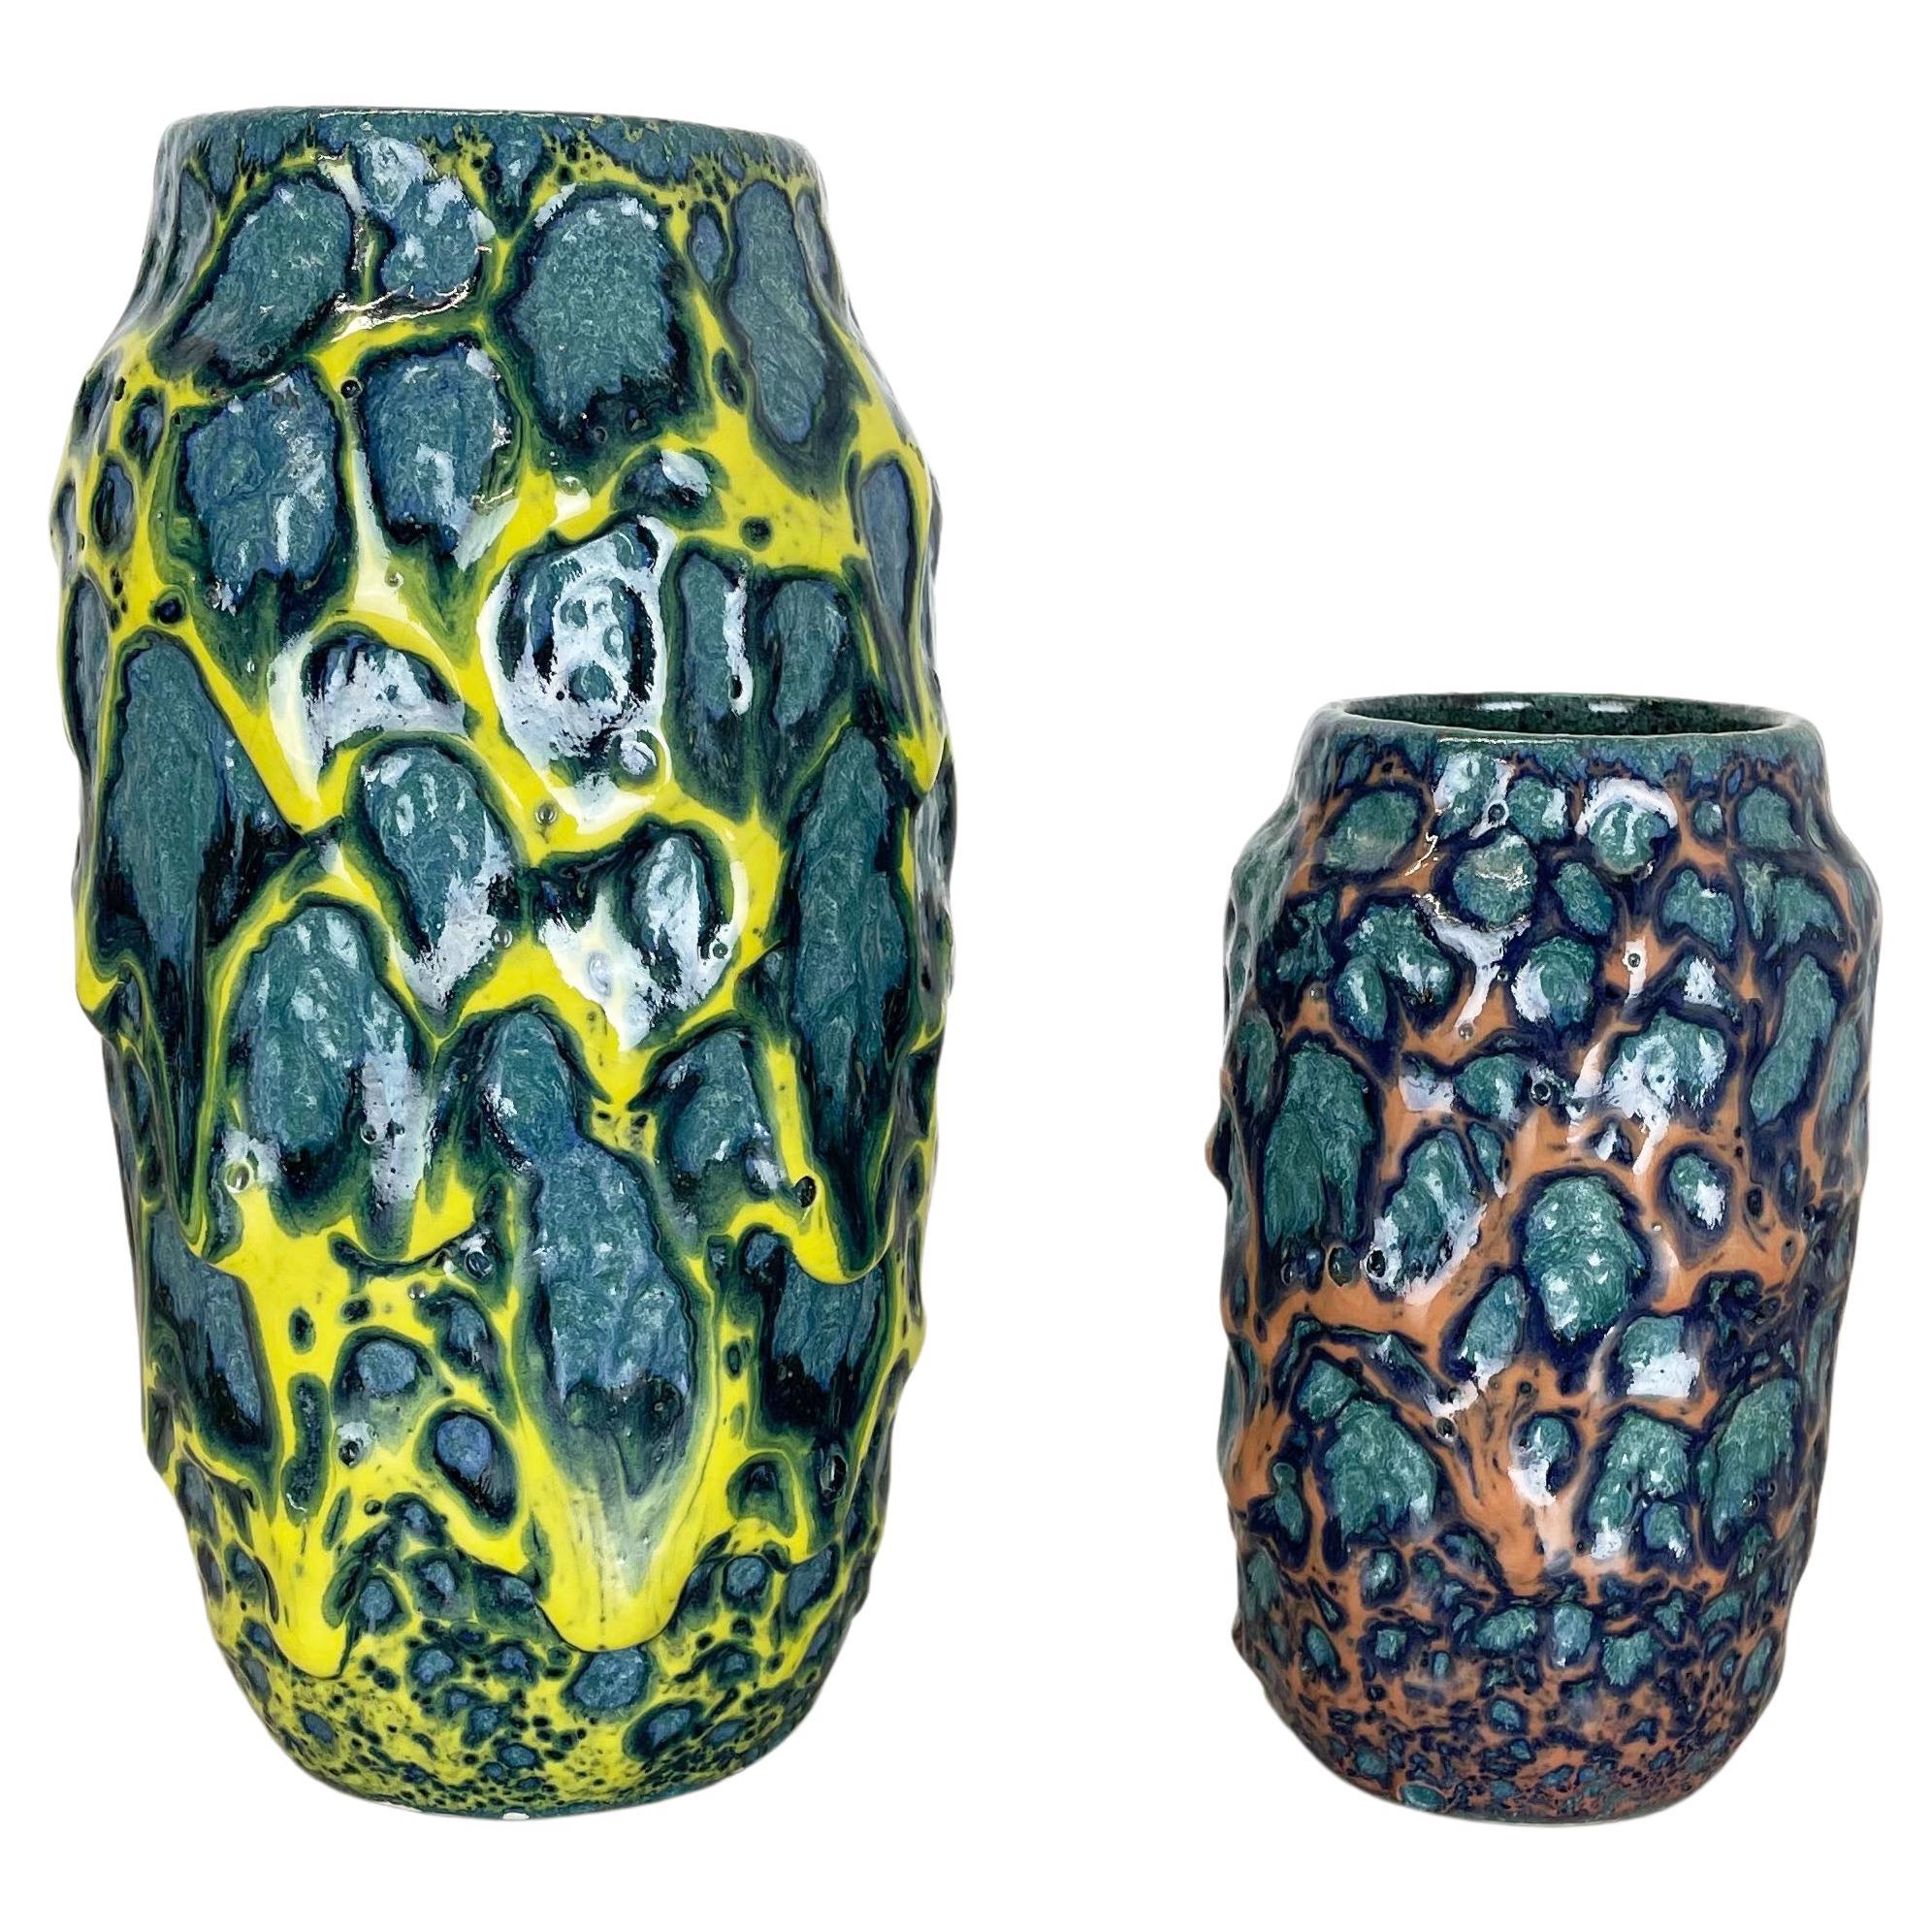 set of 2 Rare Super Color Crusty Fat Lava Vases by Scheurich, Germany WGP, 1970s For Sale